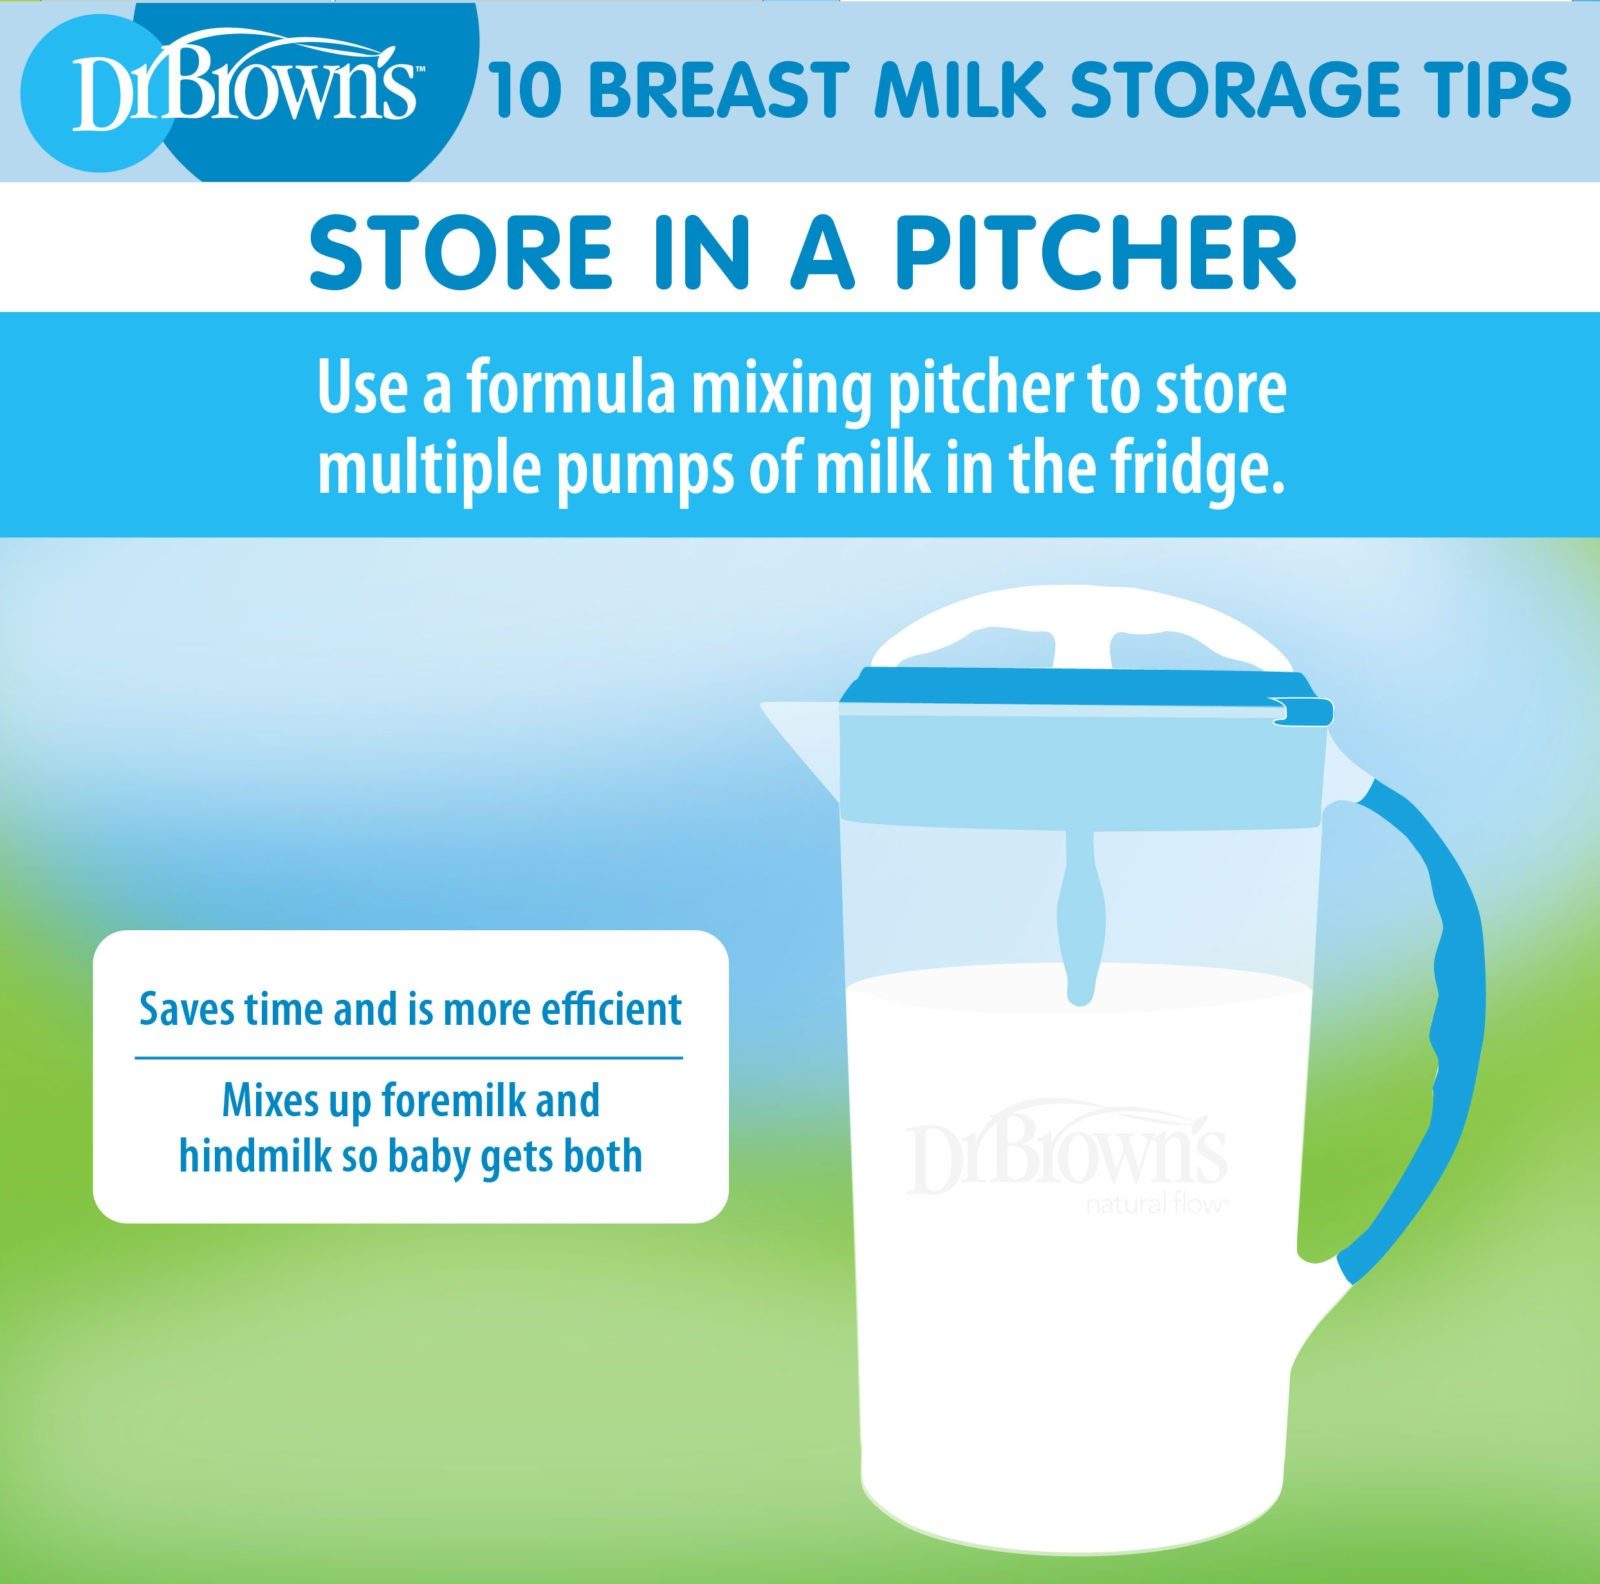 Formula Pitcher Method: How to Store Breast Milk in a Pitcher